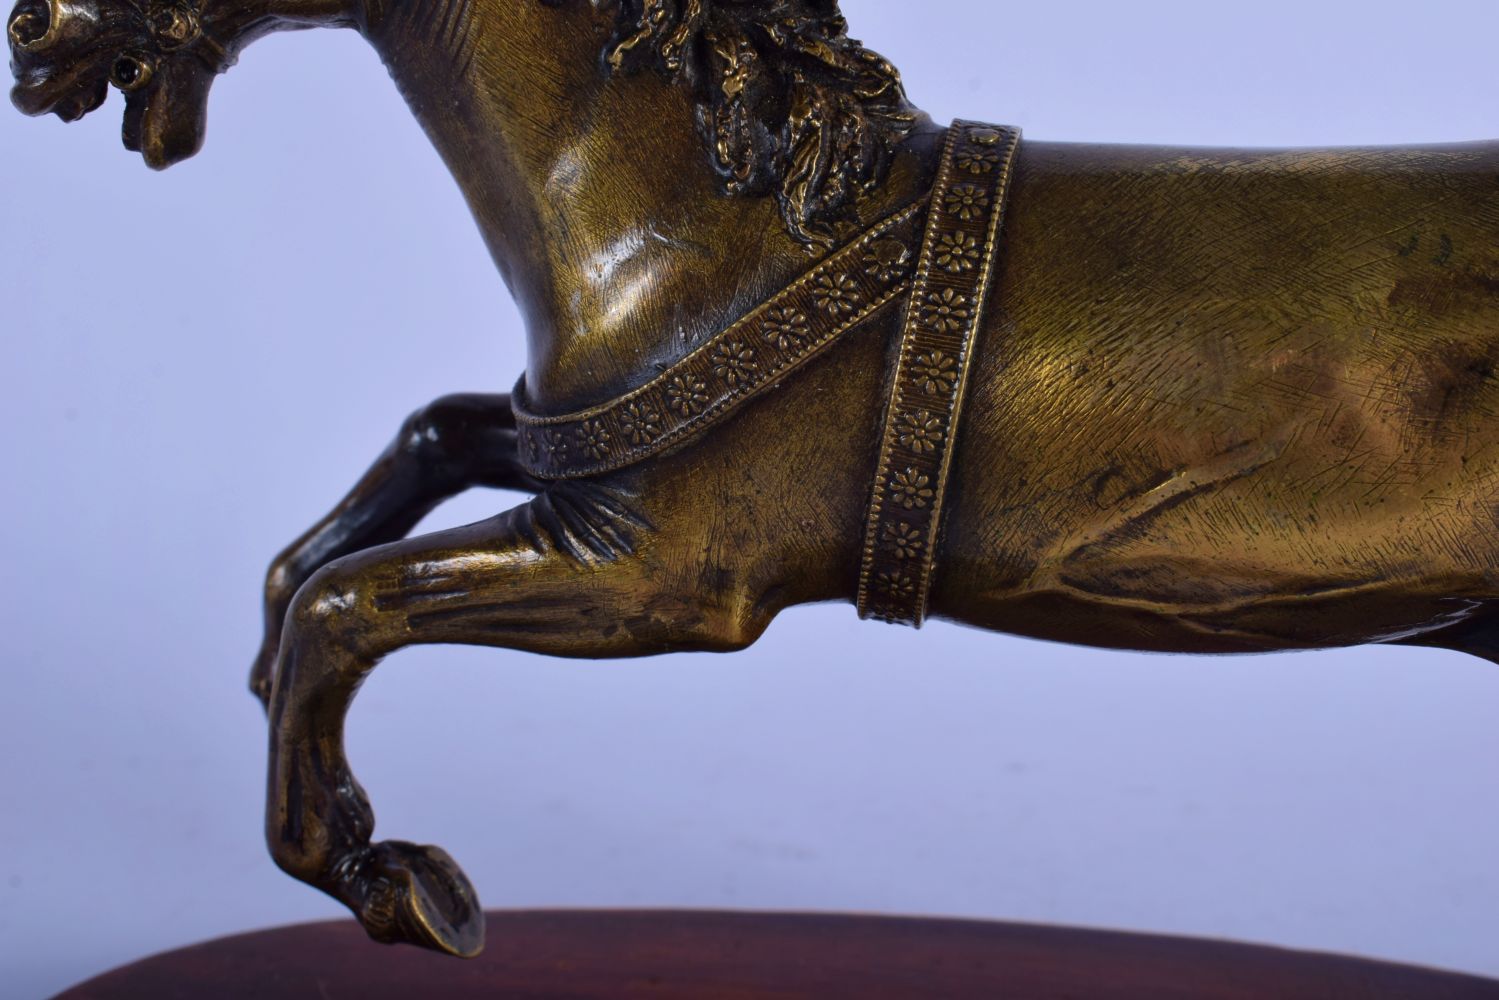 A FINE 18TH CENTURY EUROPEAN BRONZE FIGURE OF A ROAMING HORSE After the Antiquity, modelled leaping - Image 8 of 8